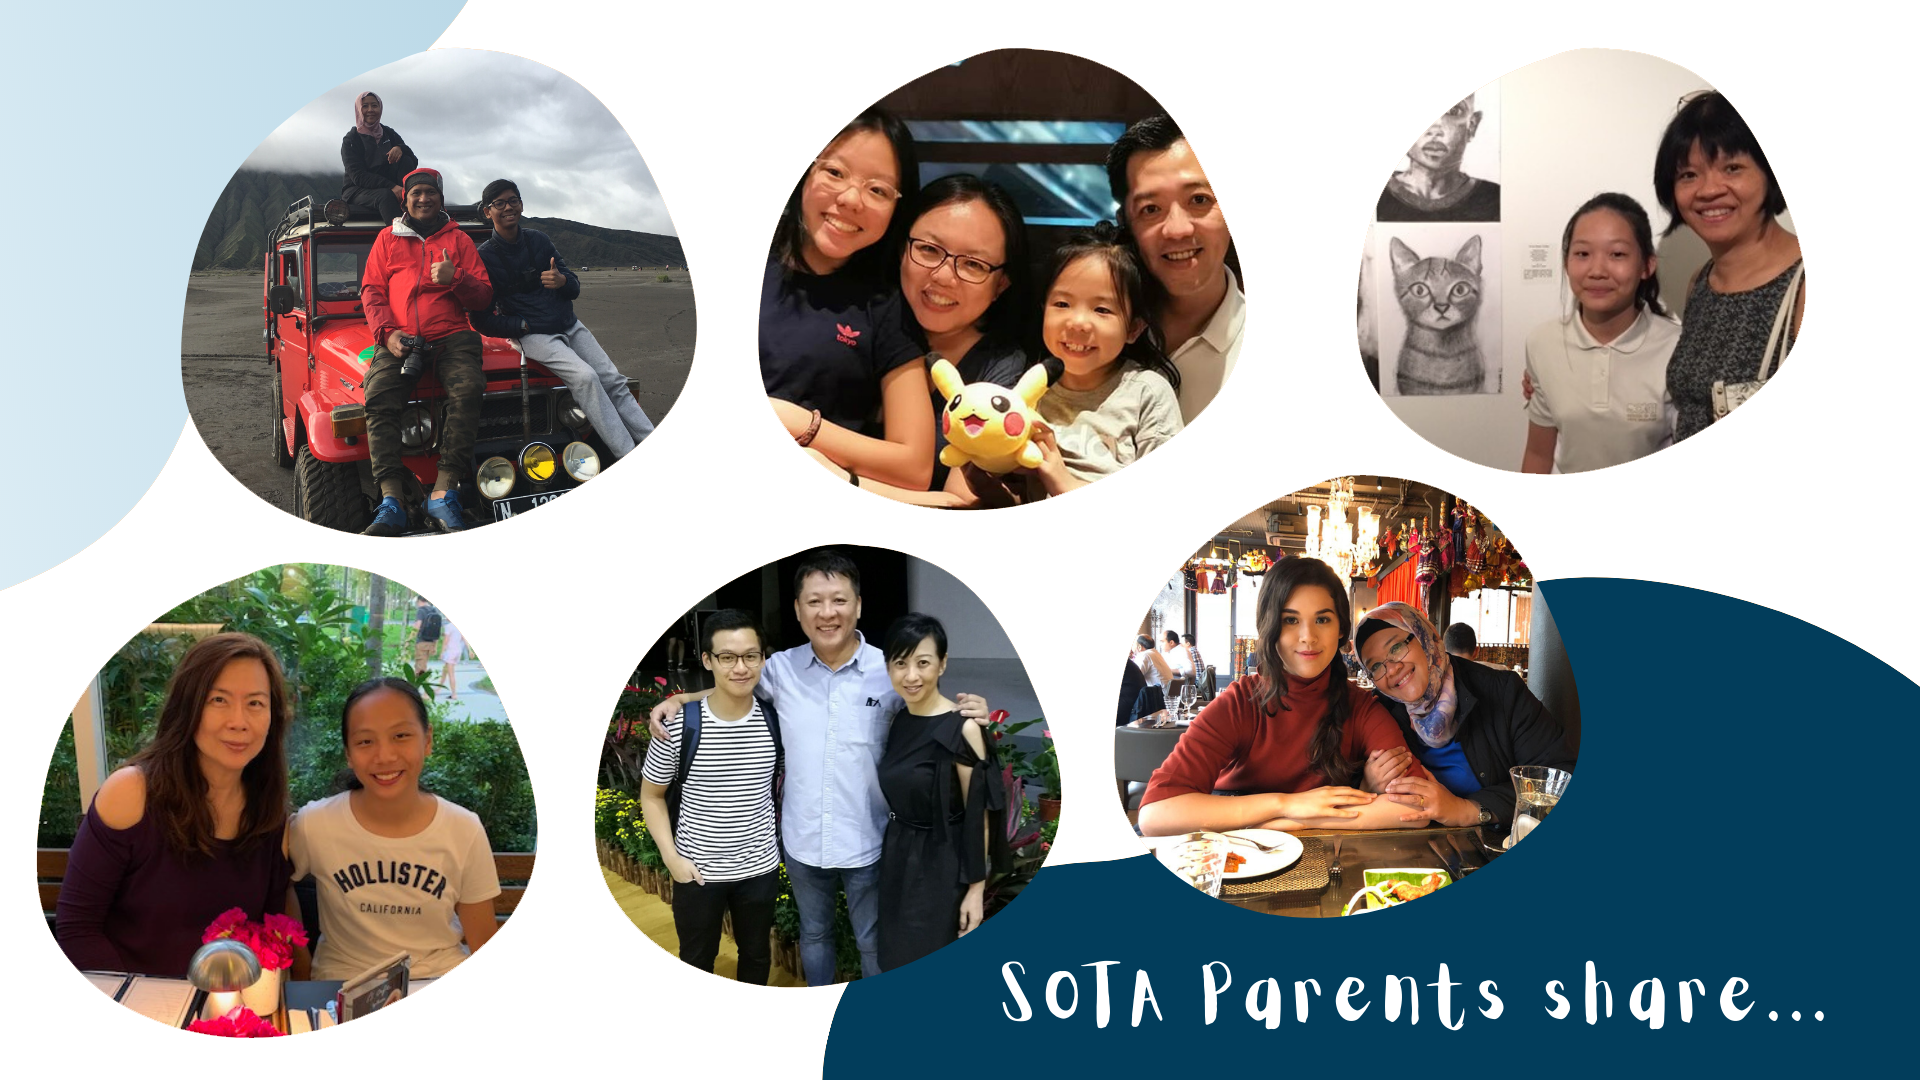 SOTA Parents share their experience